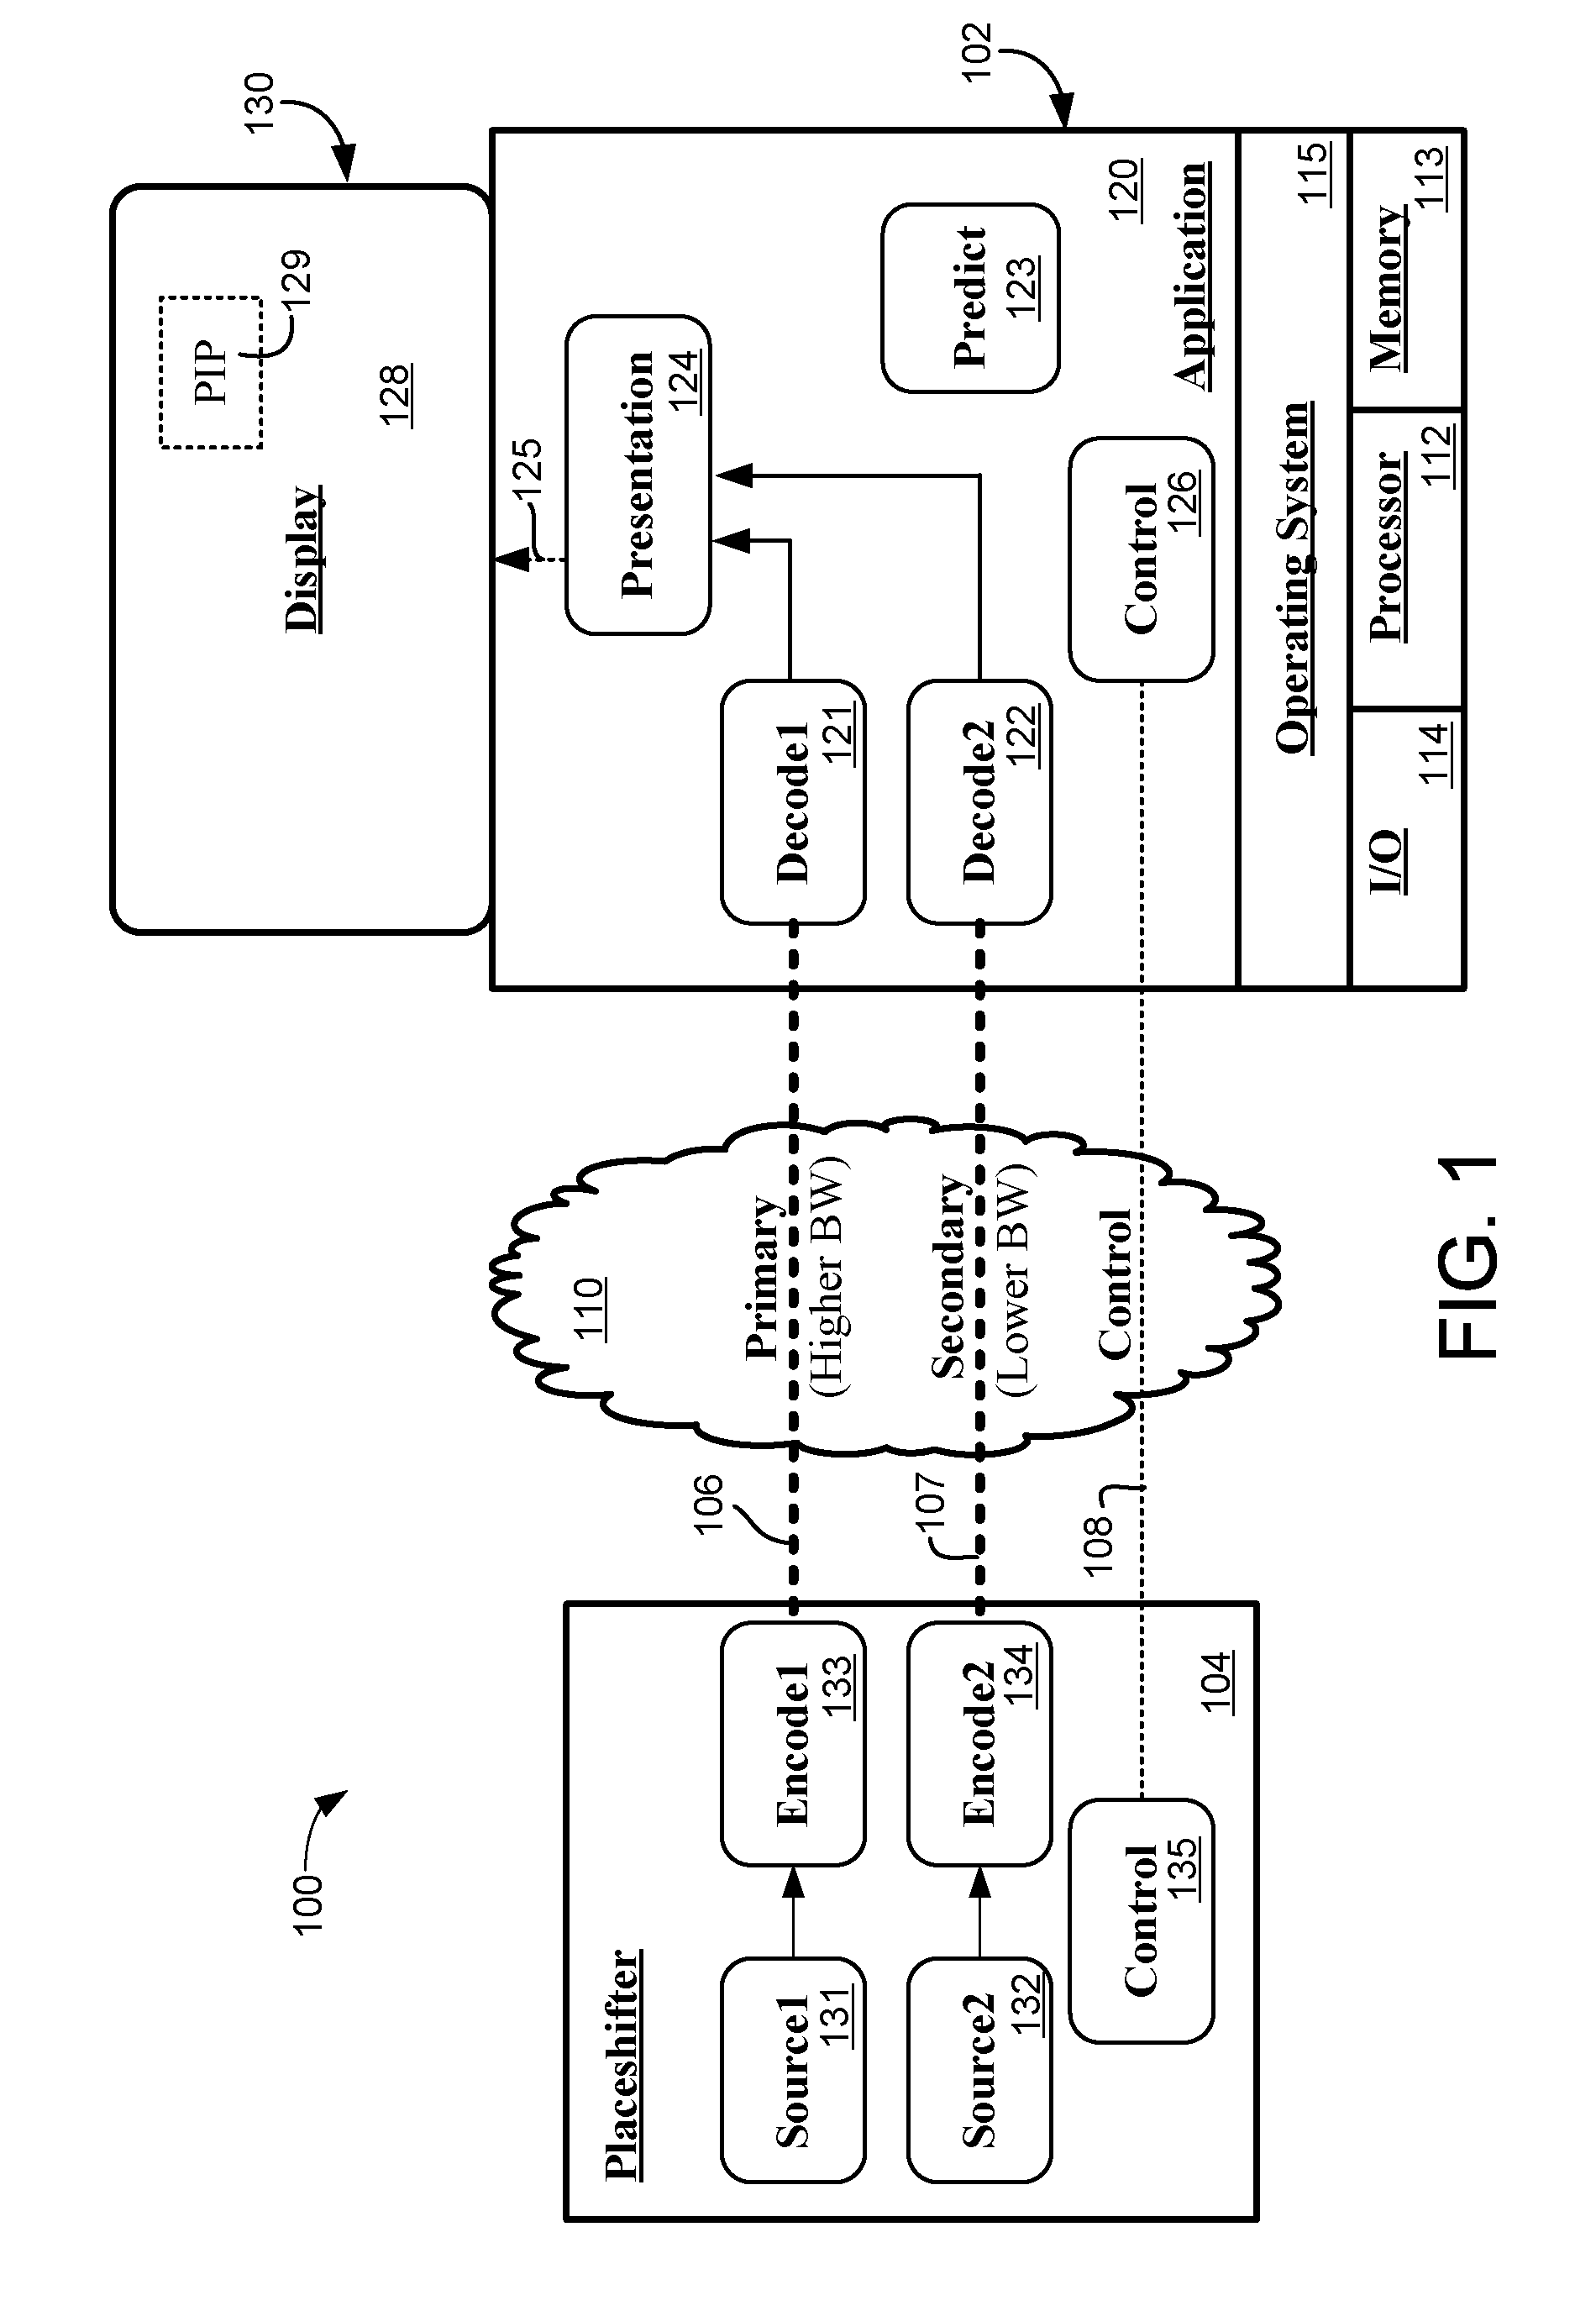 Systems, methods and devices to reduce change latency in placeshifted media streams using predictive secondary streaming